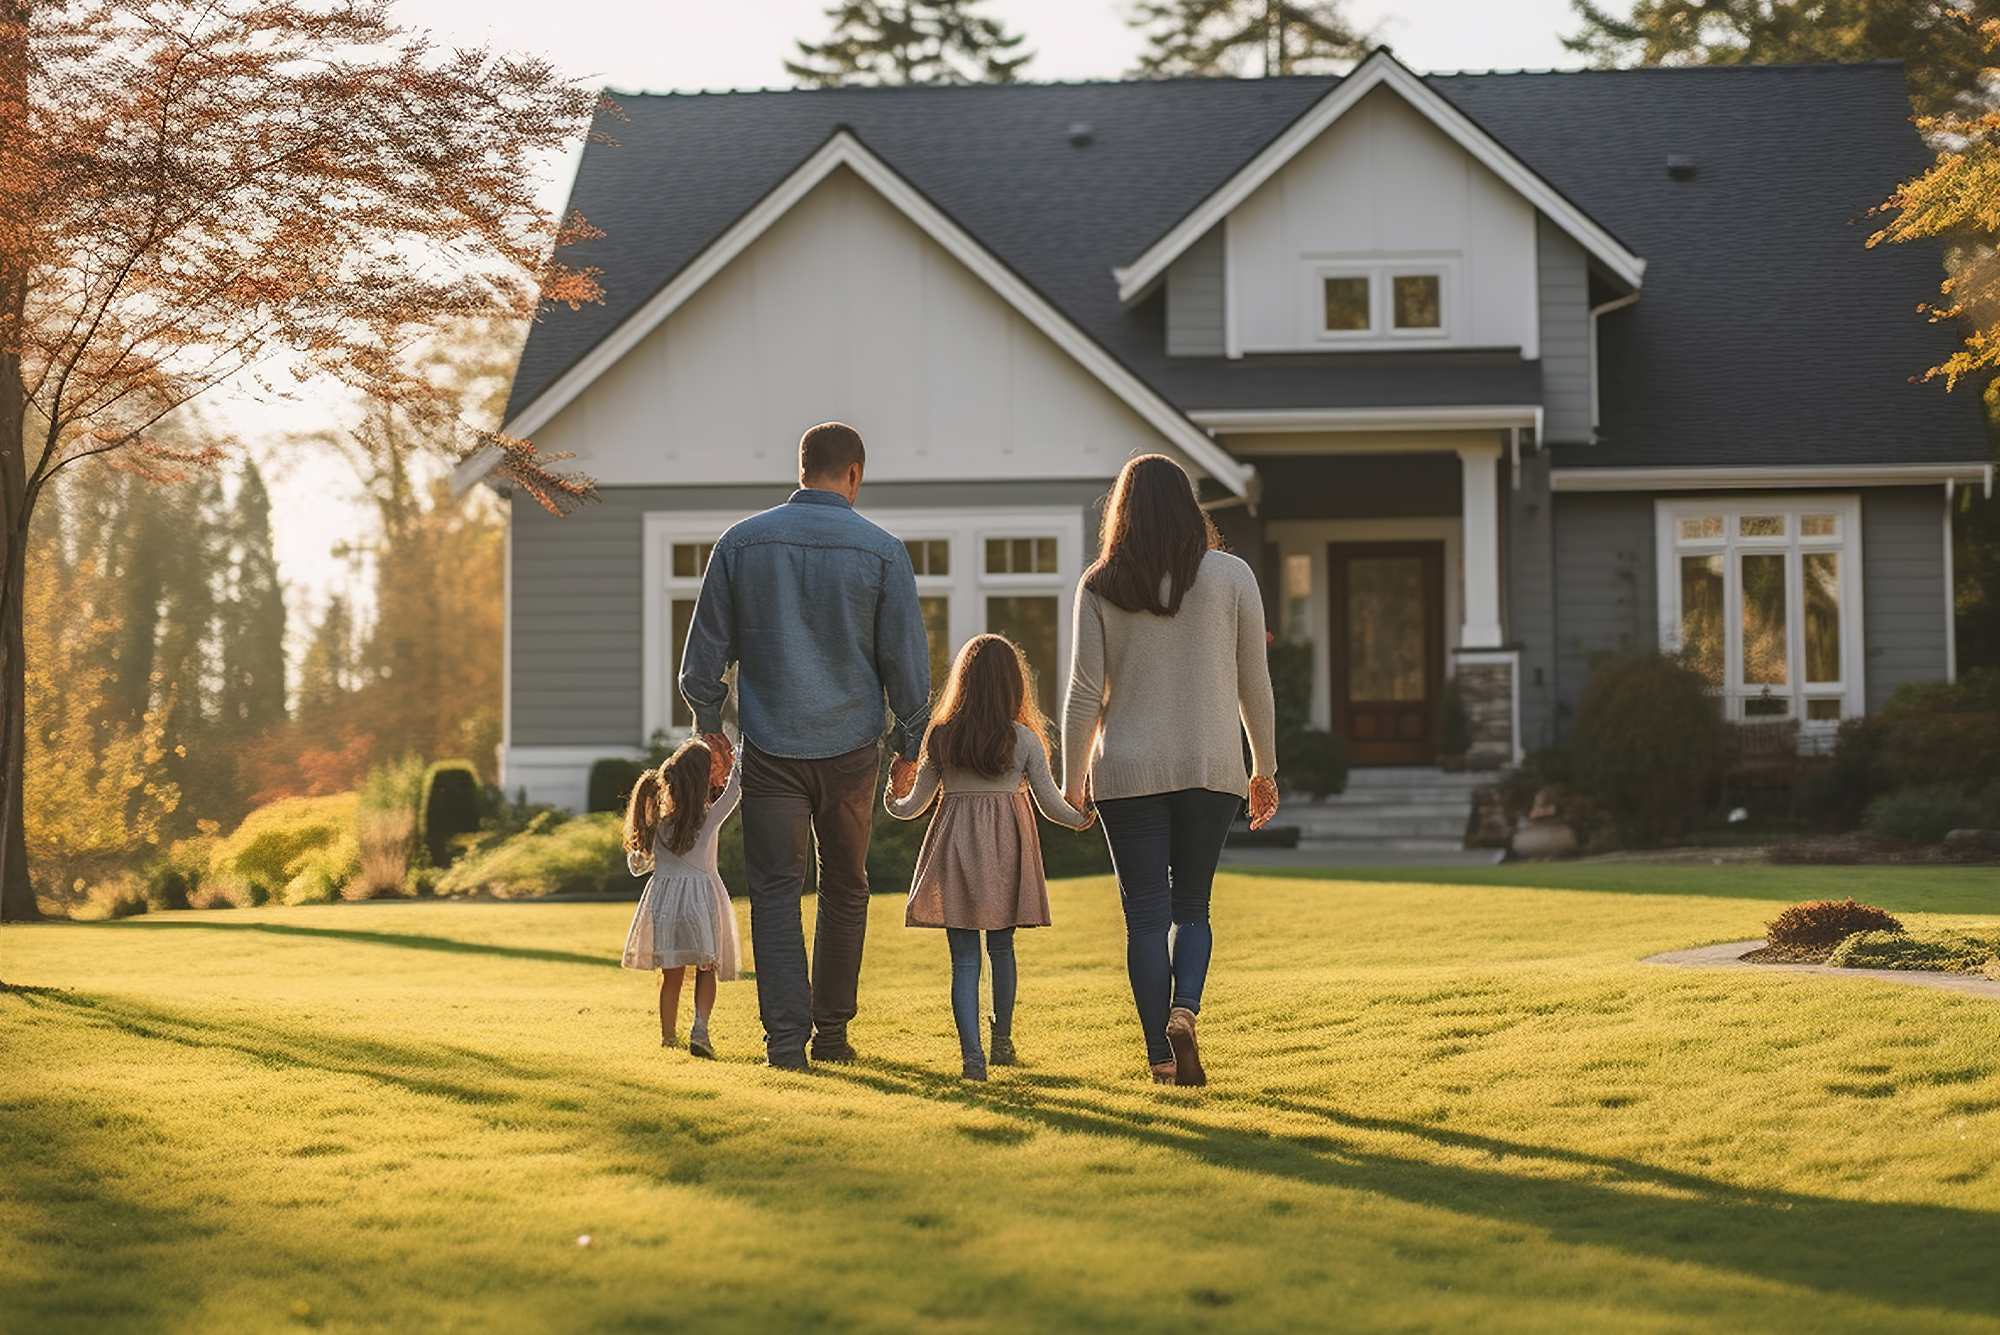 How Well are Current Employee Benefits Programs Meeting the Needs of Modern Families? - A family of four walking towards their house.